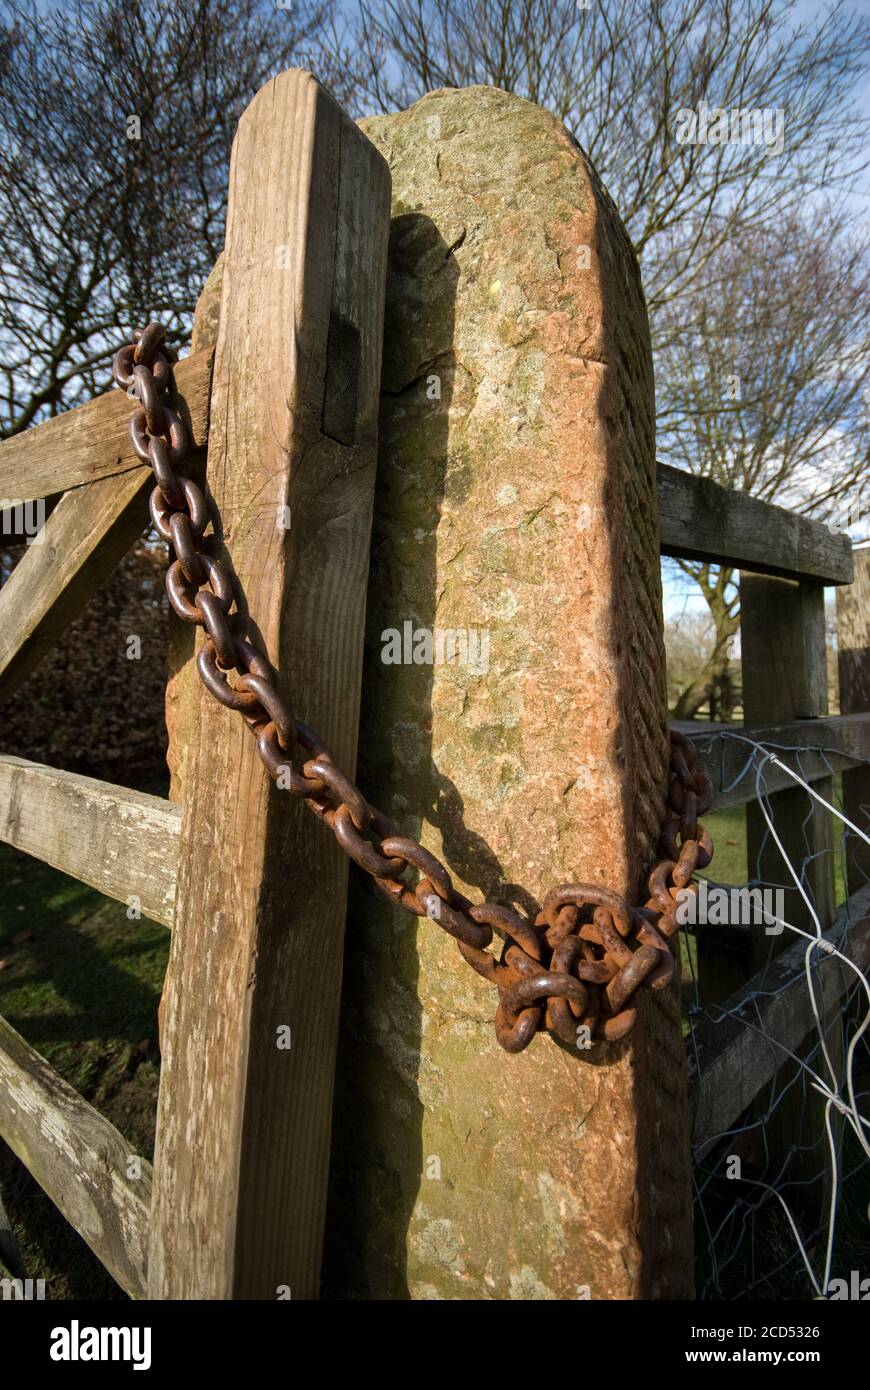 Chained Farm Gate Stock Photo